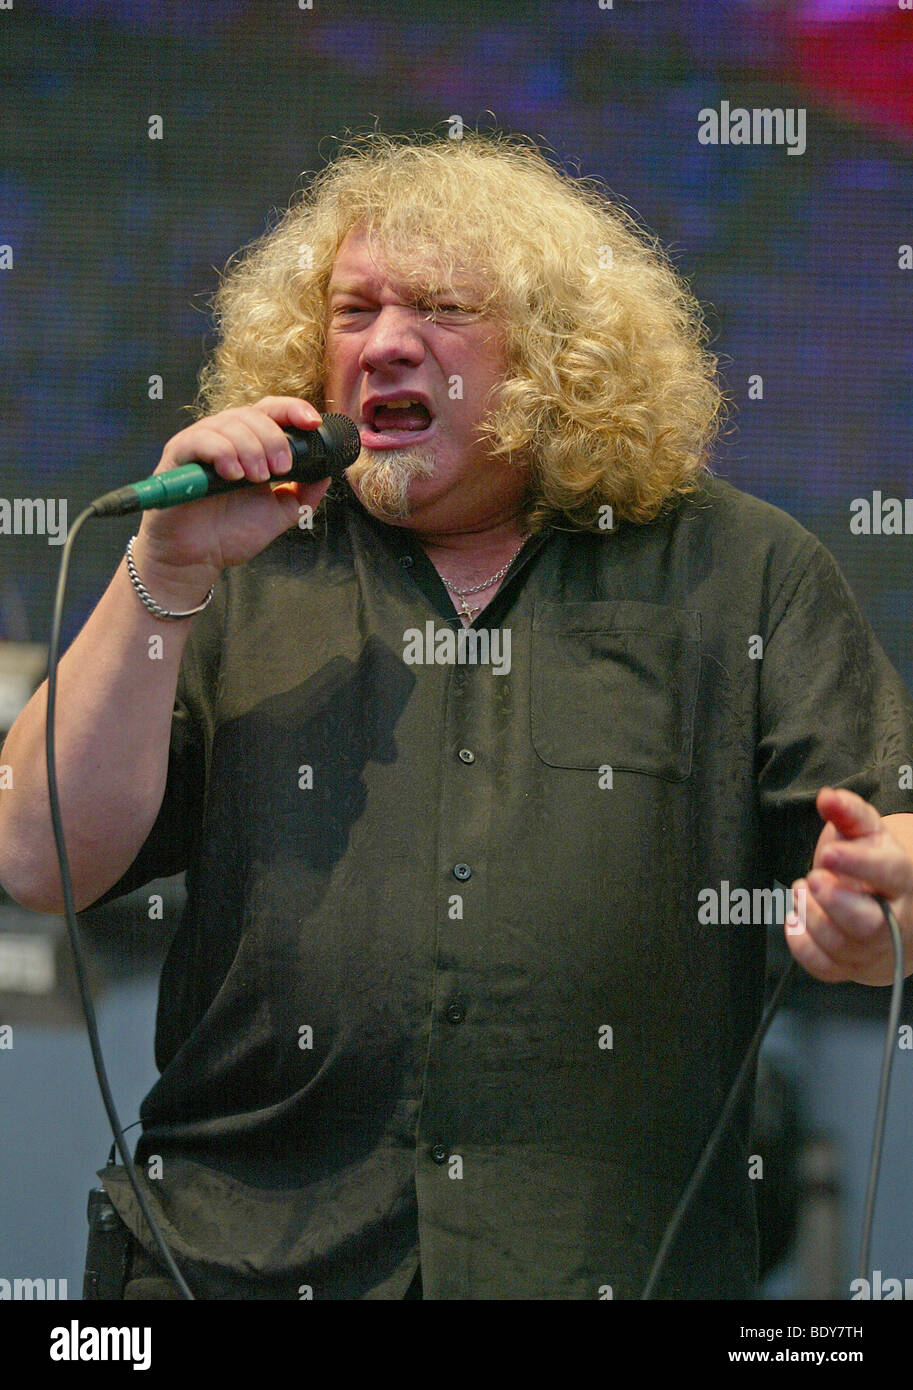 Lou Gramm Young